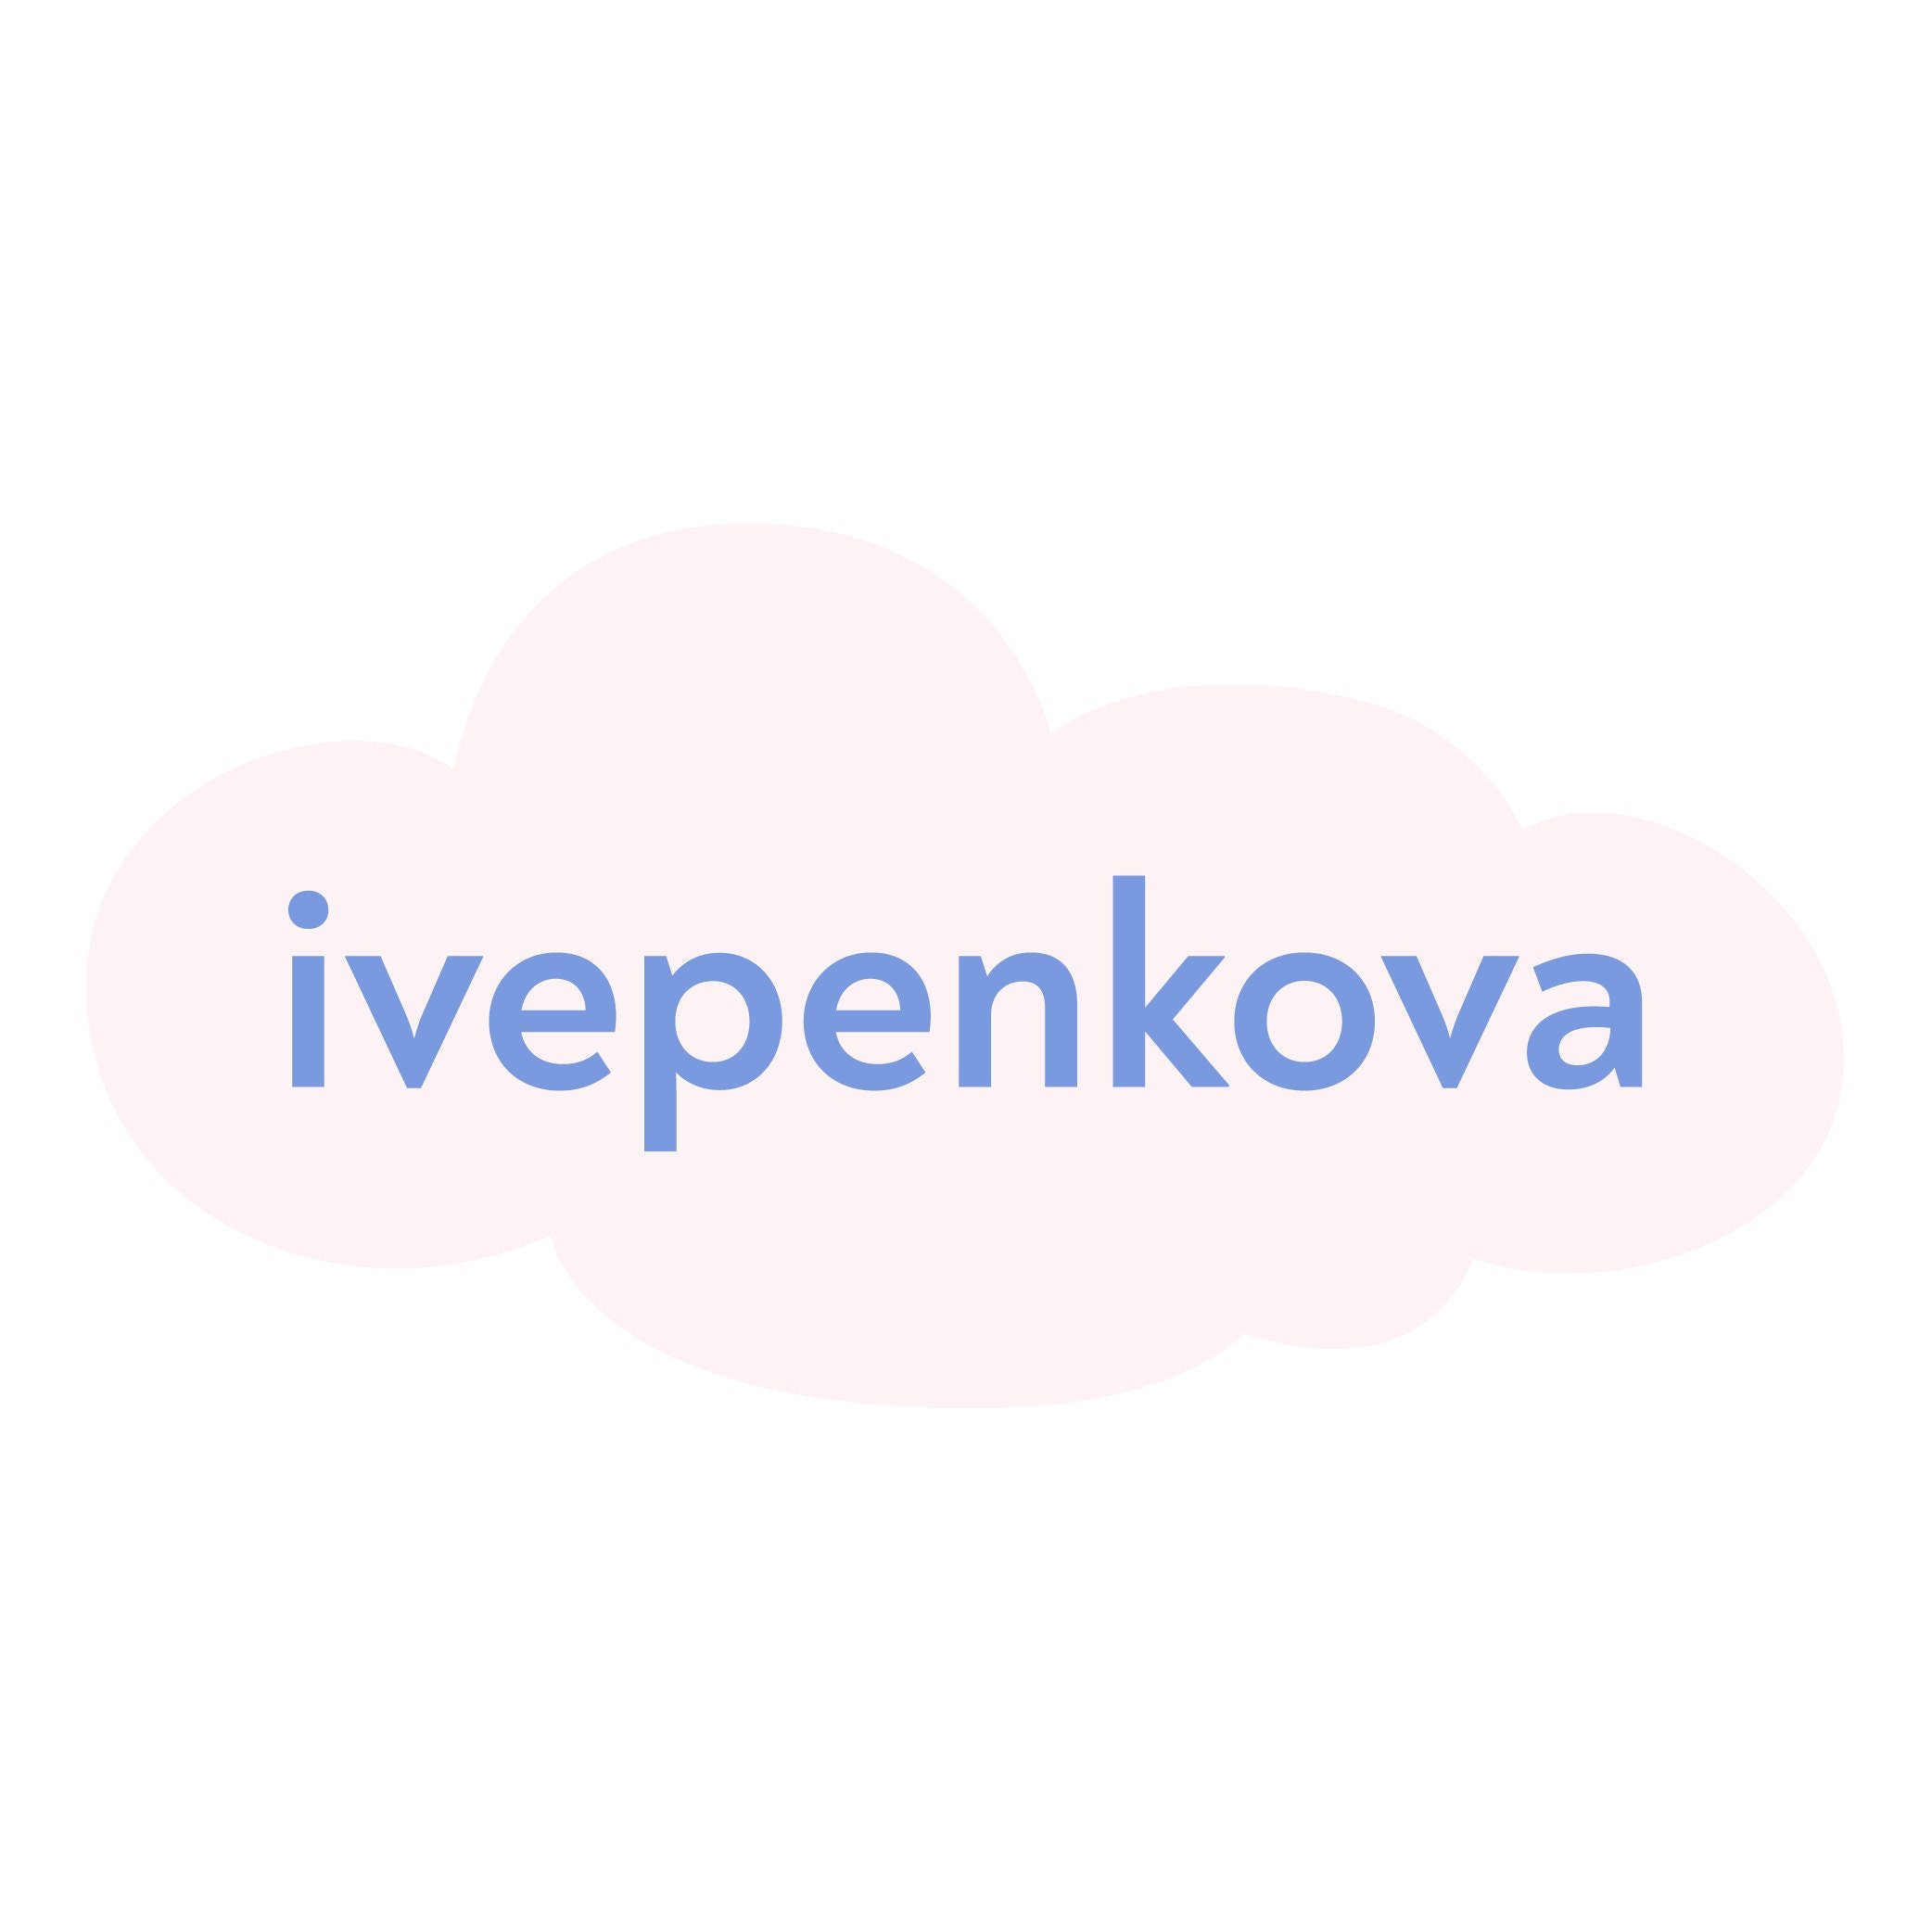 IvePenkovaDesigns